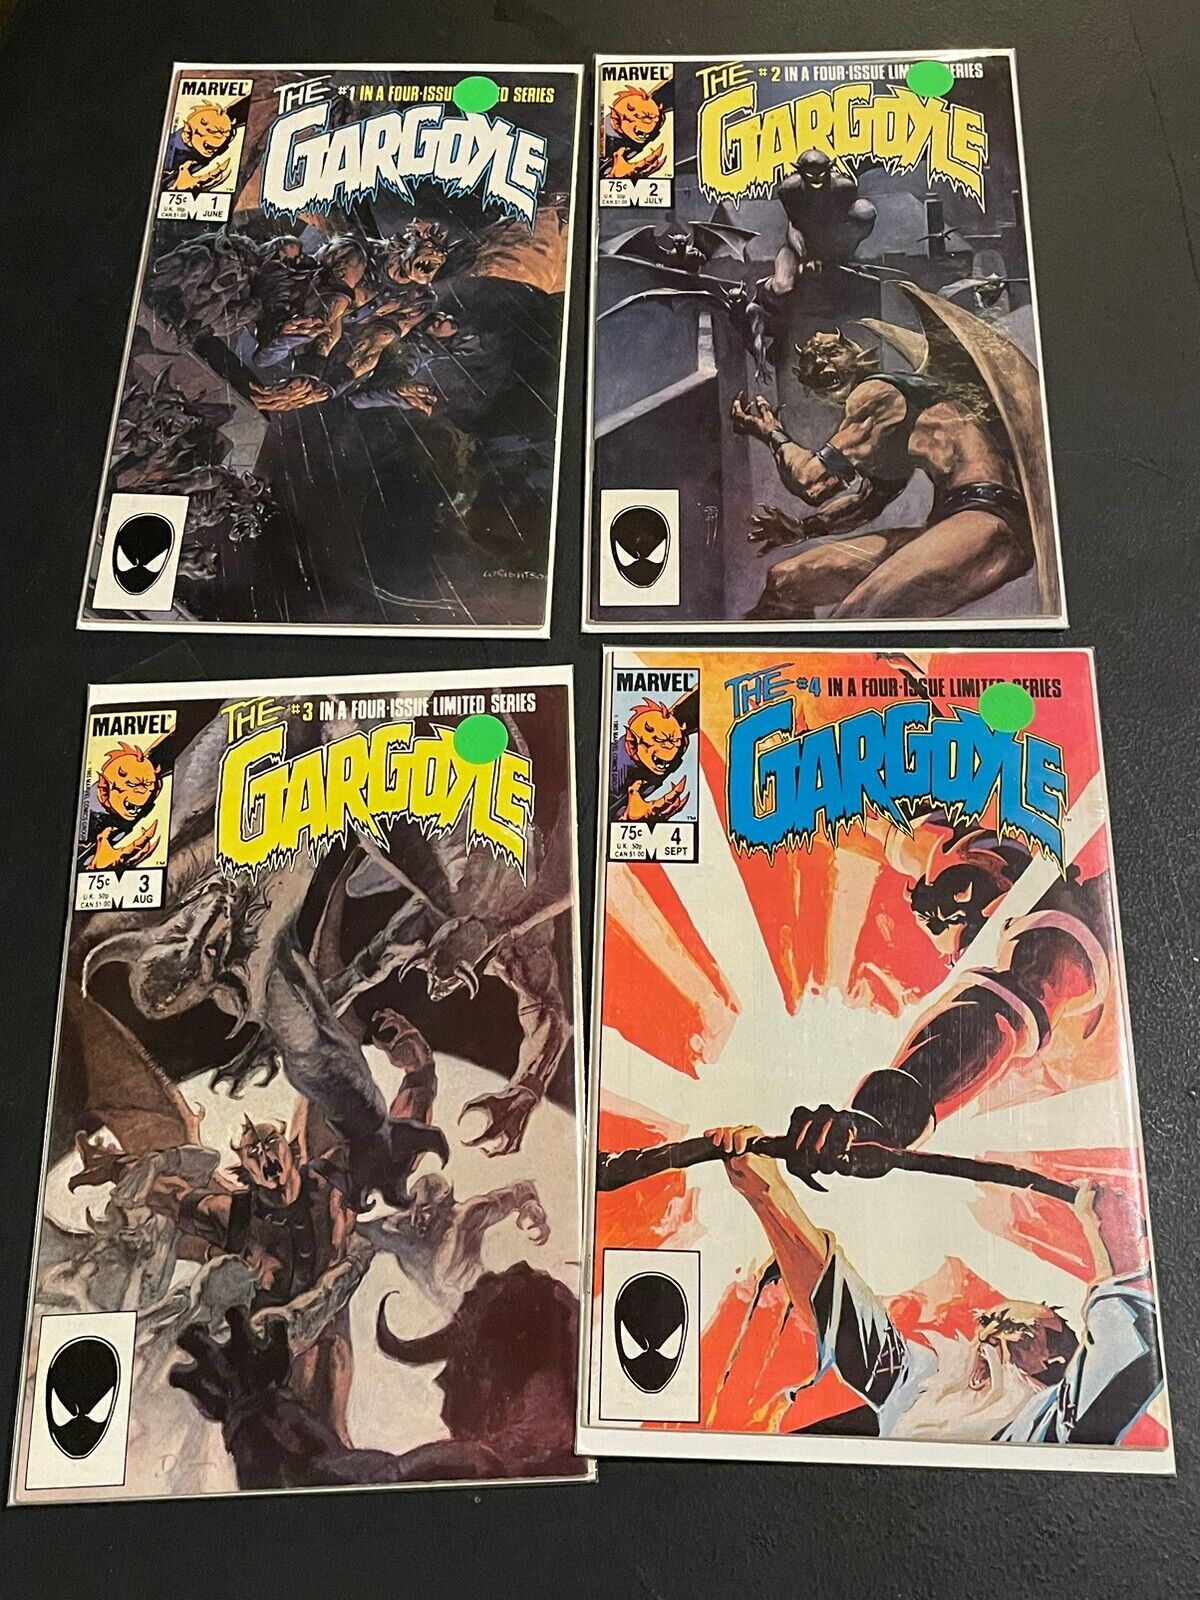 The Gargoyle #1-4 1985 Marvel Comic Books Four Issue Limited Series 1 2 3 4